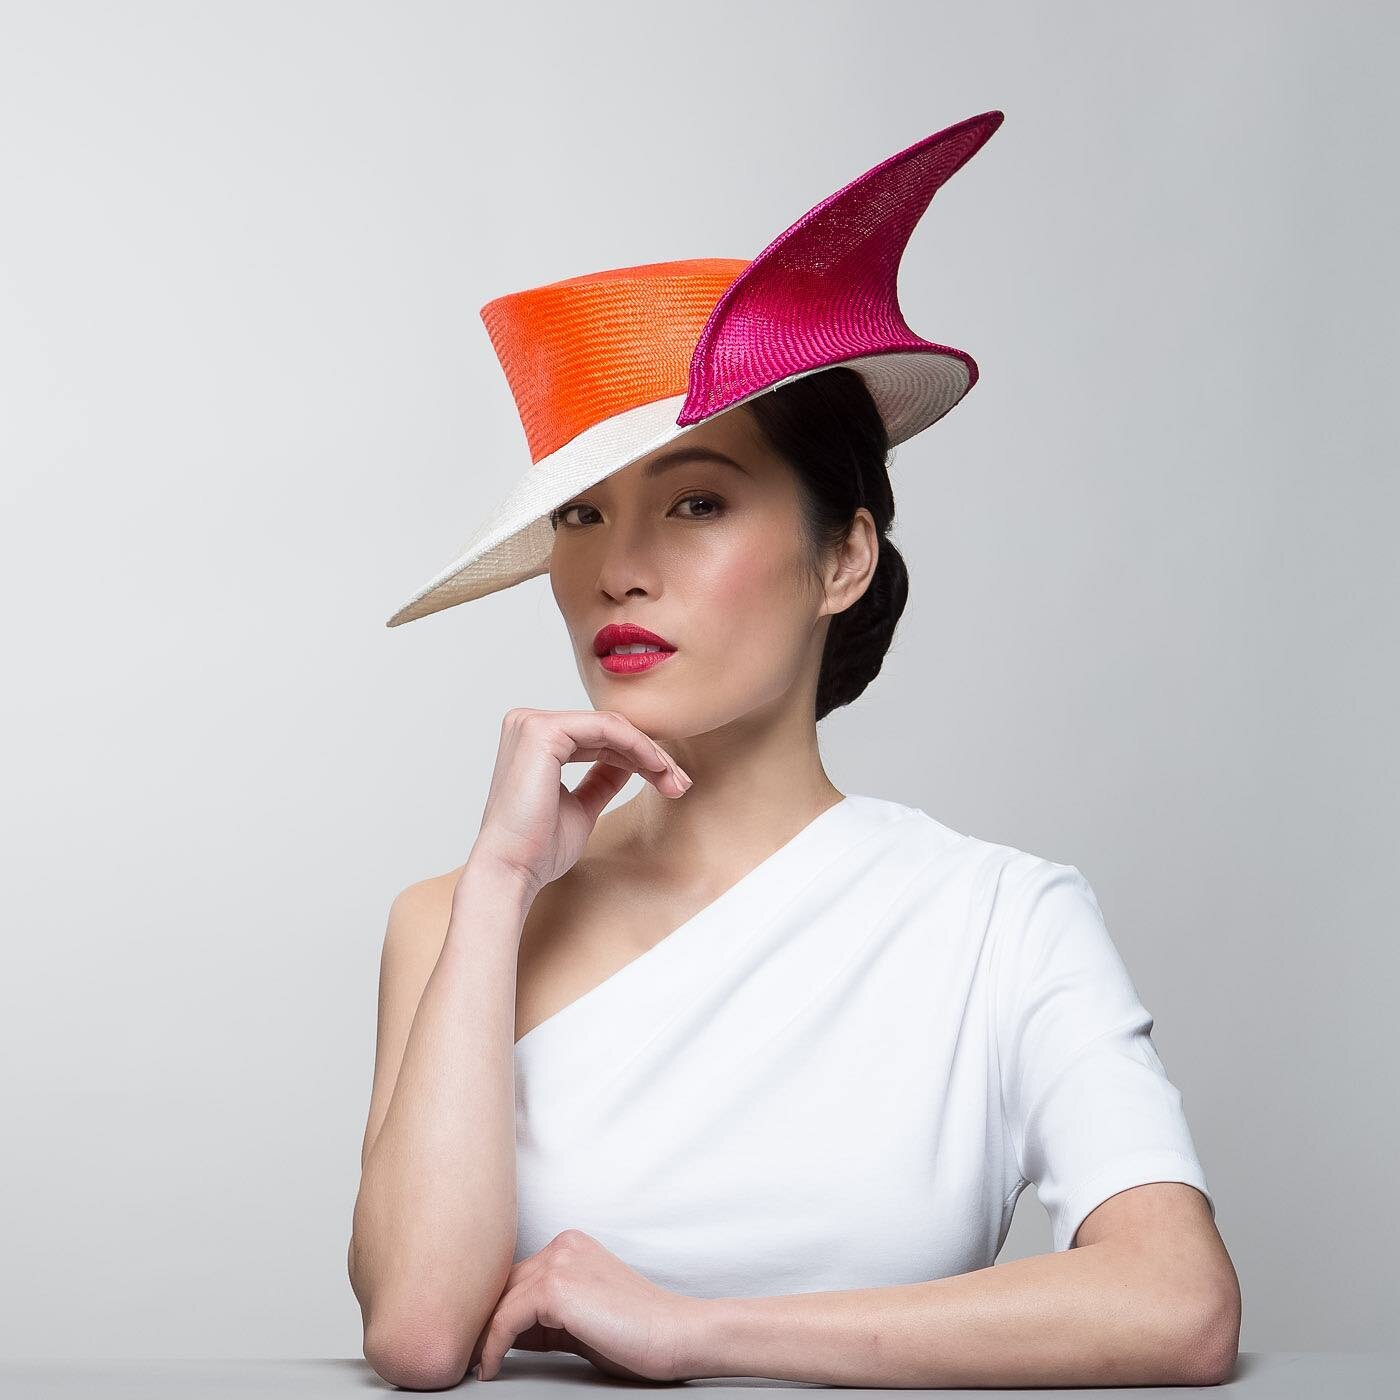 Interesting from every angle.

Come check out all the amazing millinery in @millineryaustralia Design Award &lsquo;Counterbalance&rsquo;

Place your vote at https://millineryaustralia.org/cast-your-vote/

Model: @finolaxie 
Makeup: @amykennymakeup 
P